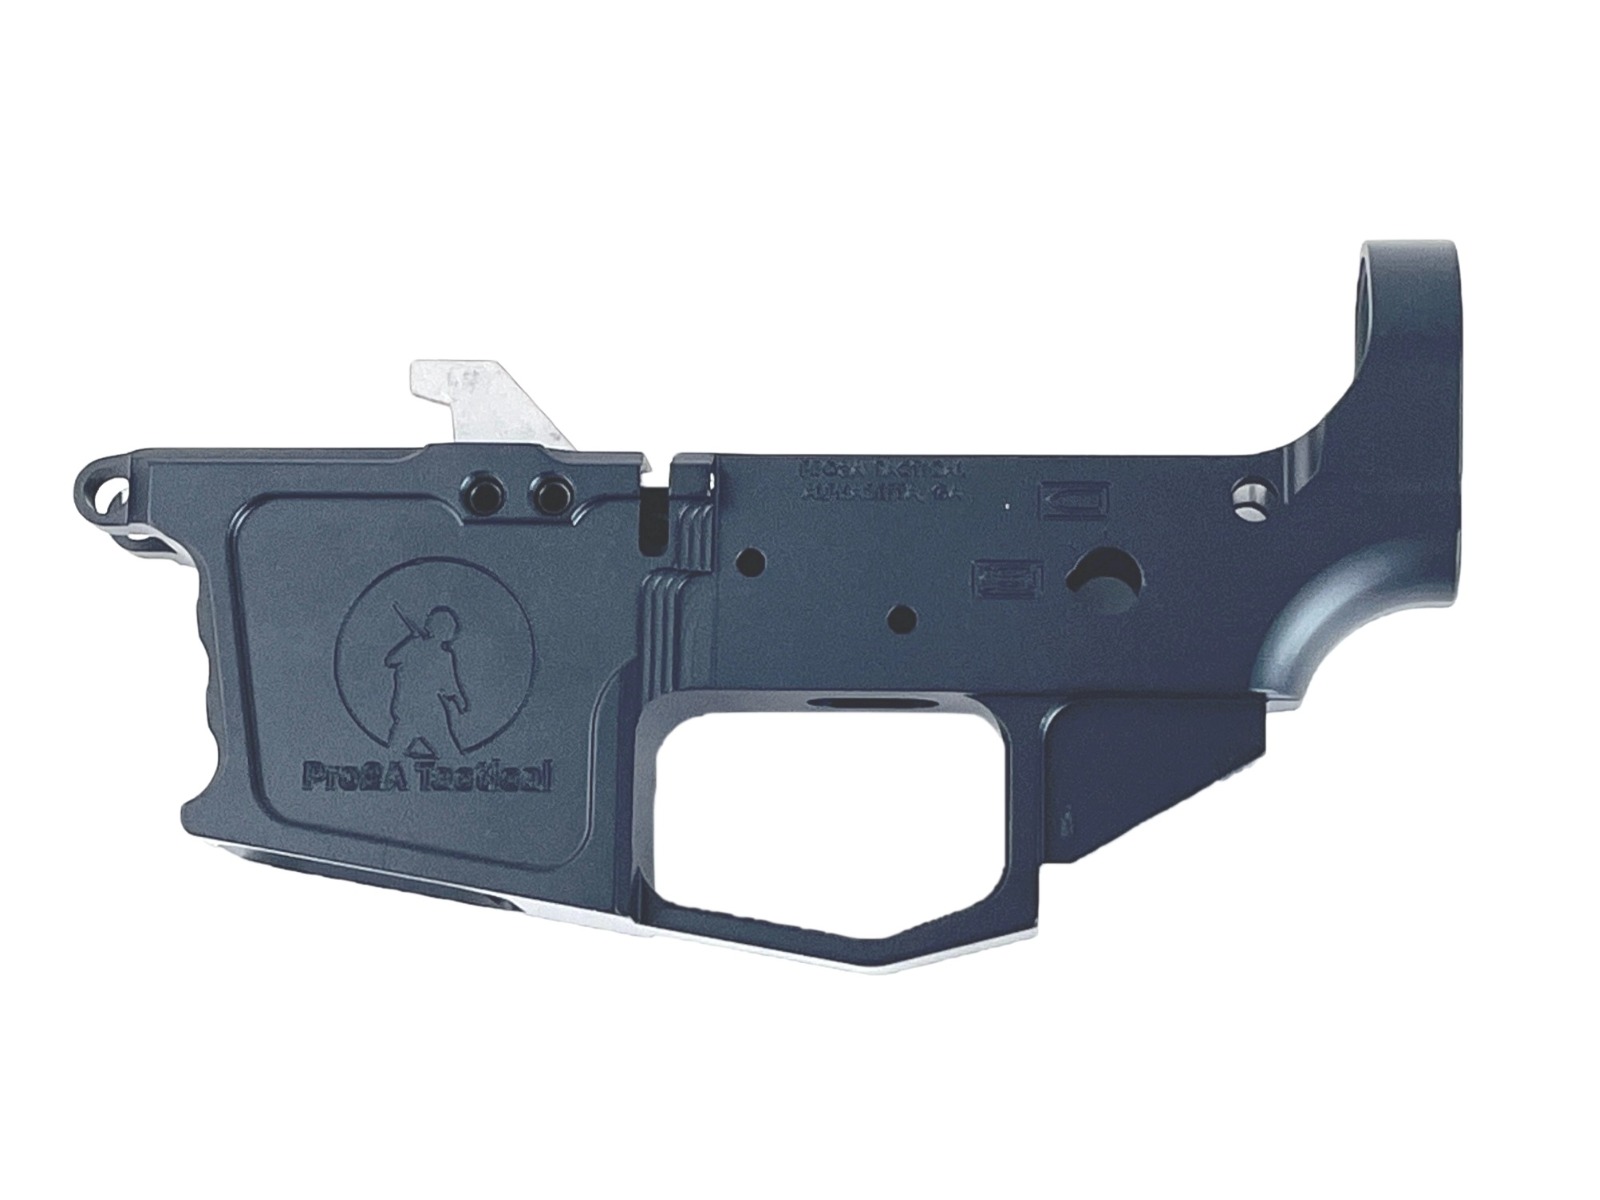 Pro2a Tactical 9mm Billet Lower- Stealth Gray